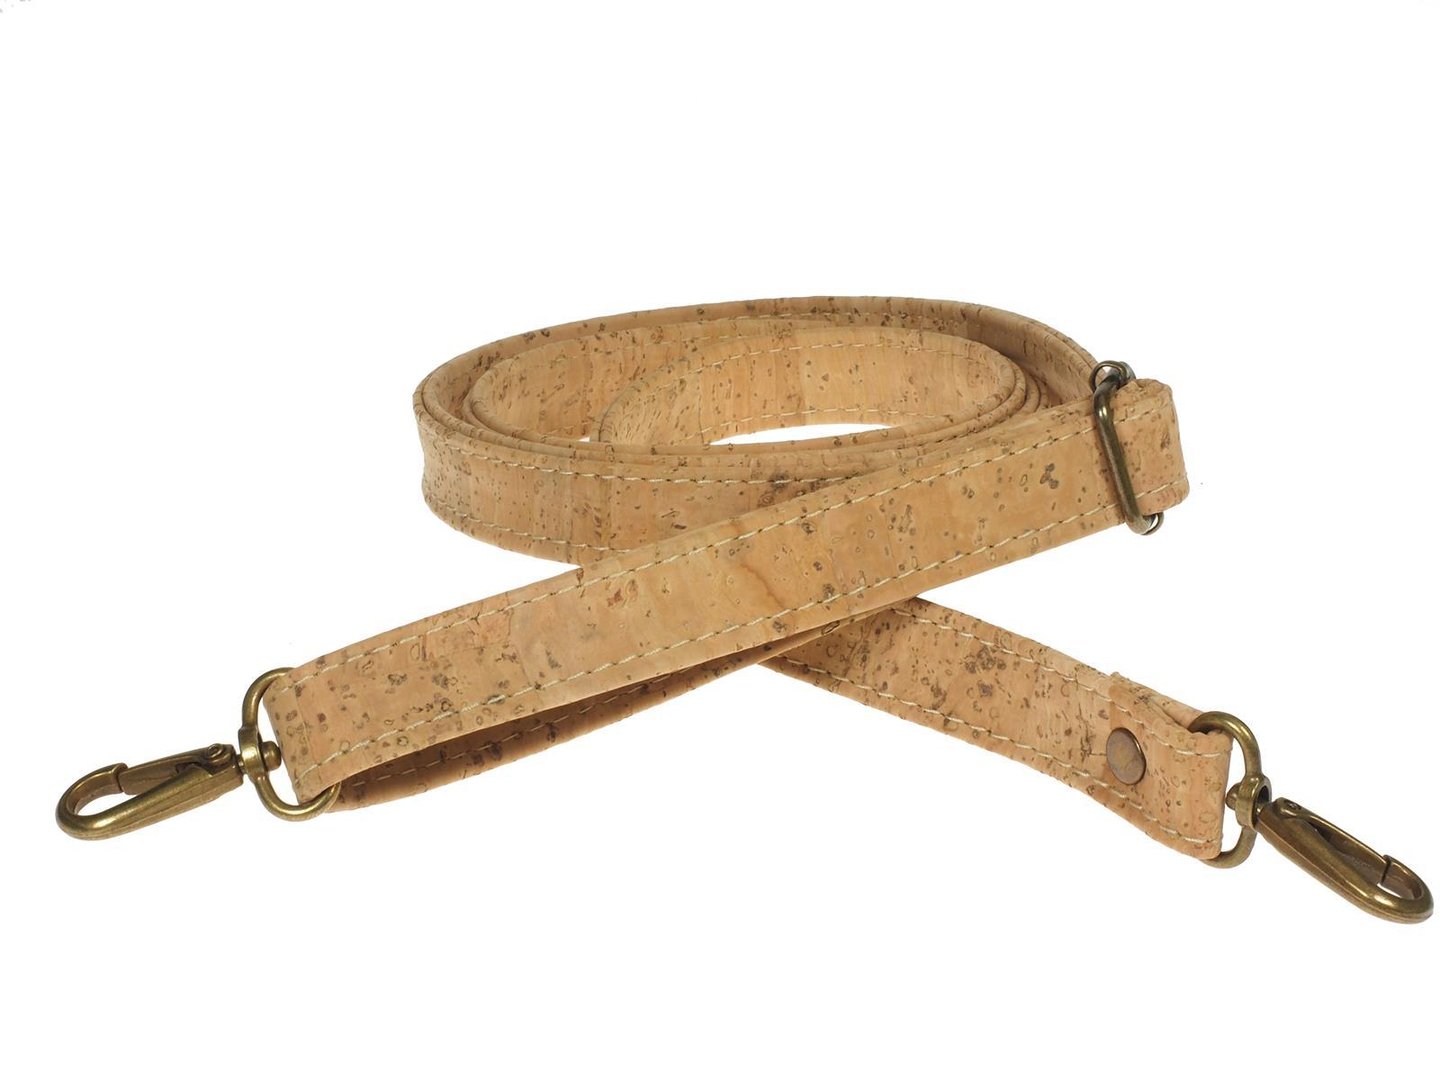 2200 N Br Carrying Strap For Bags